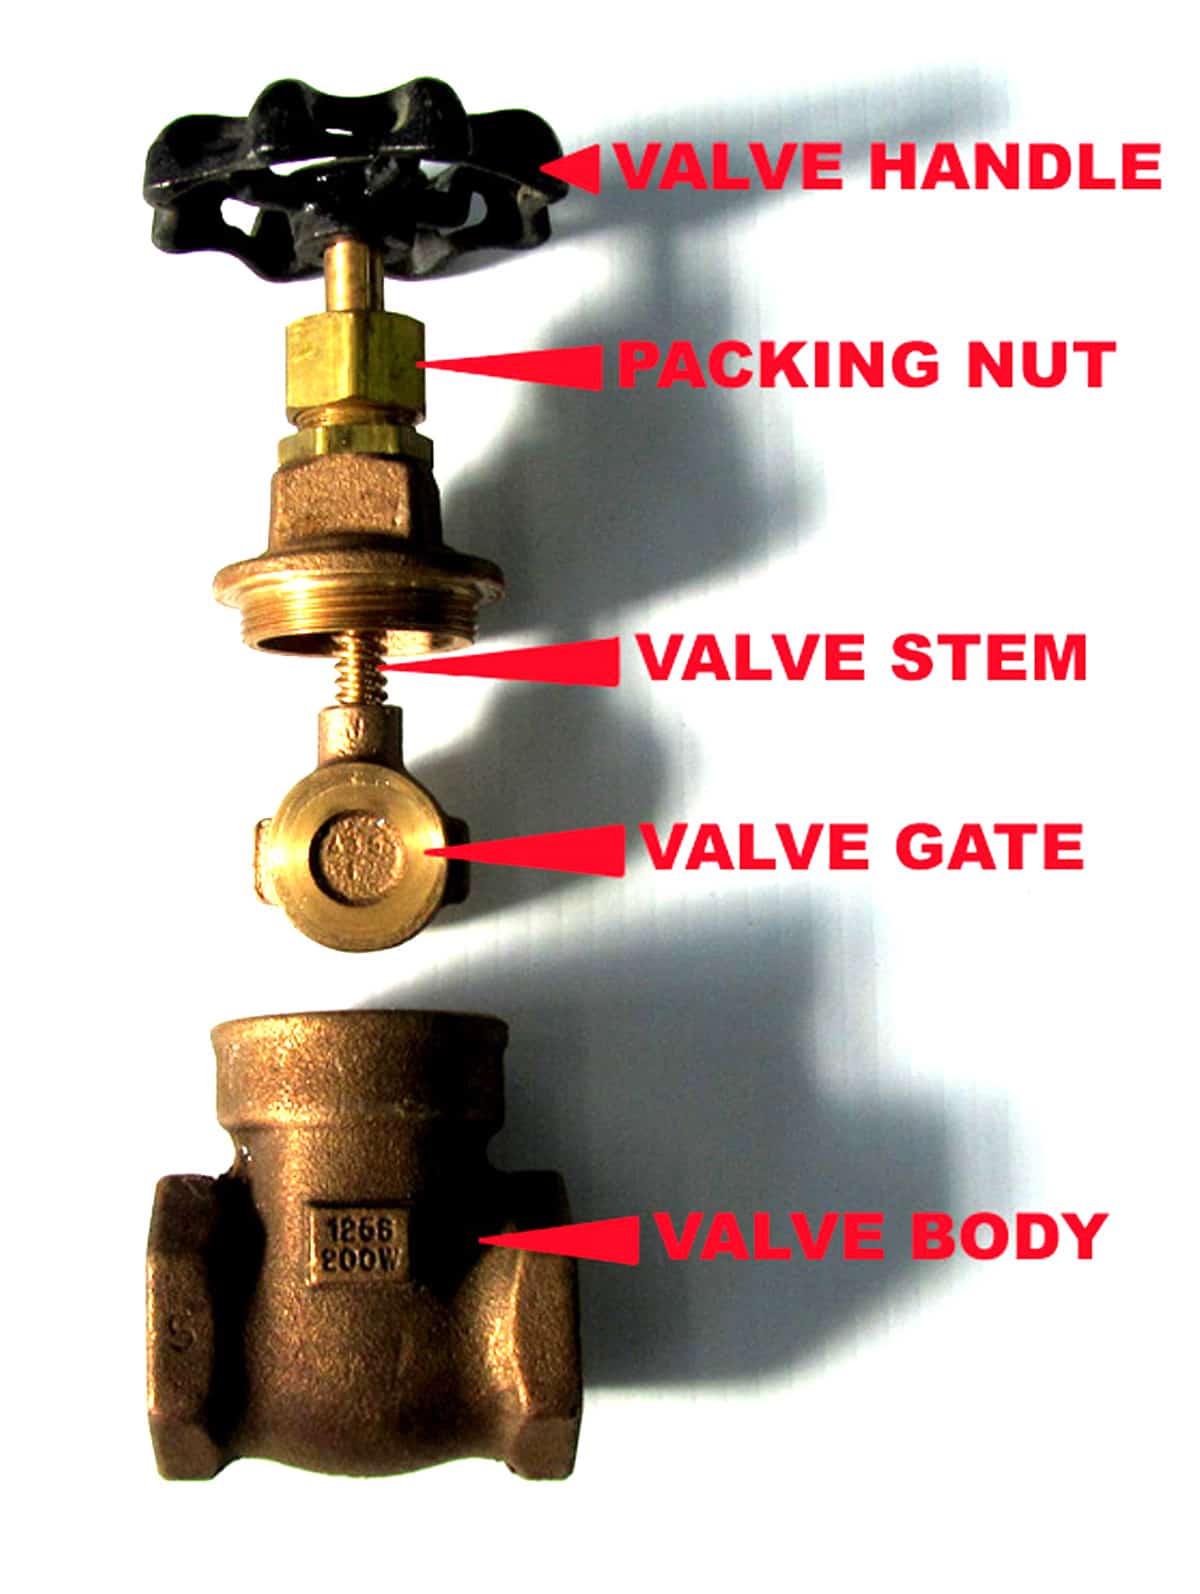 Issues with a water valve can include a leaking packing nut.